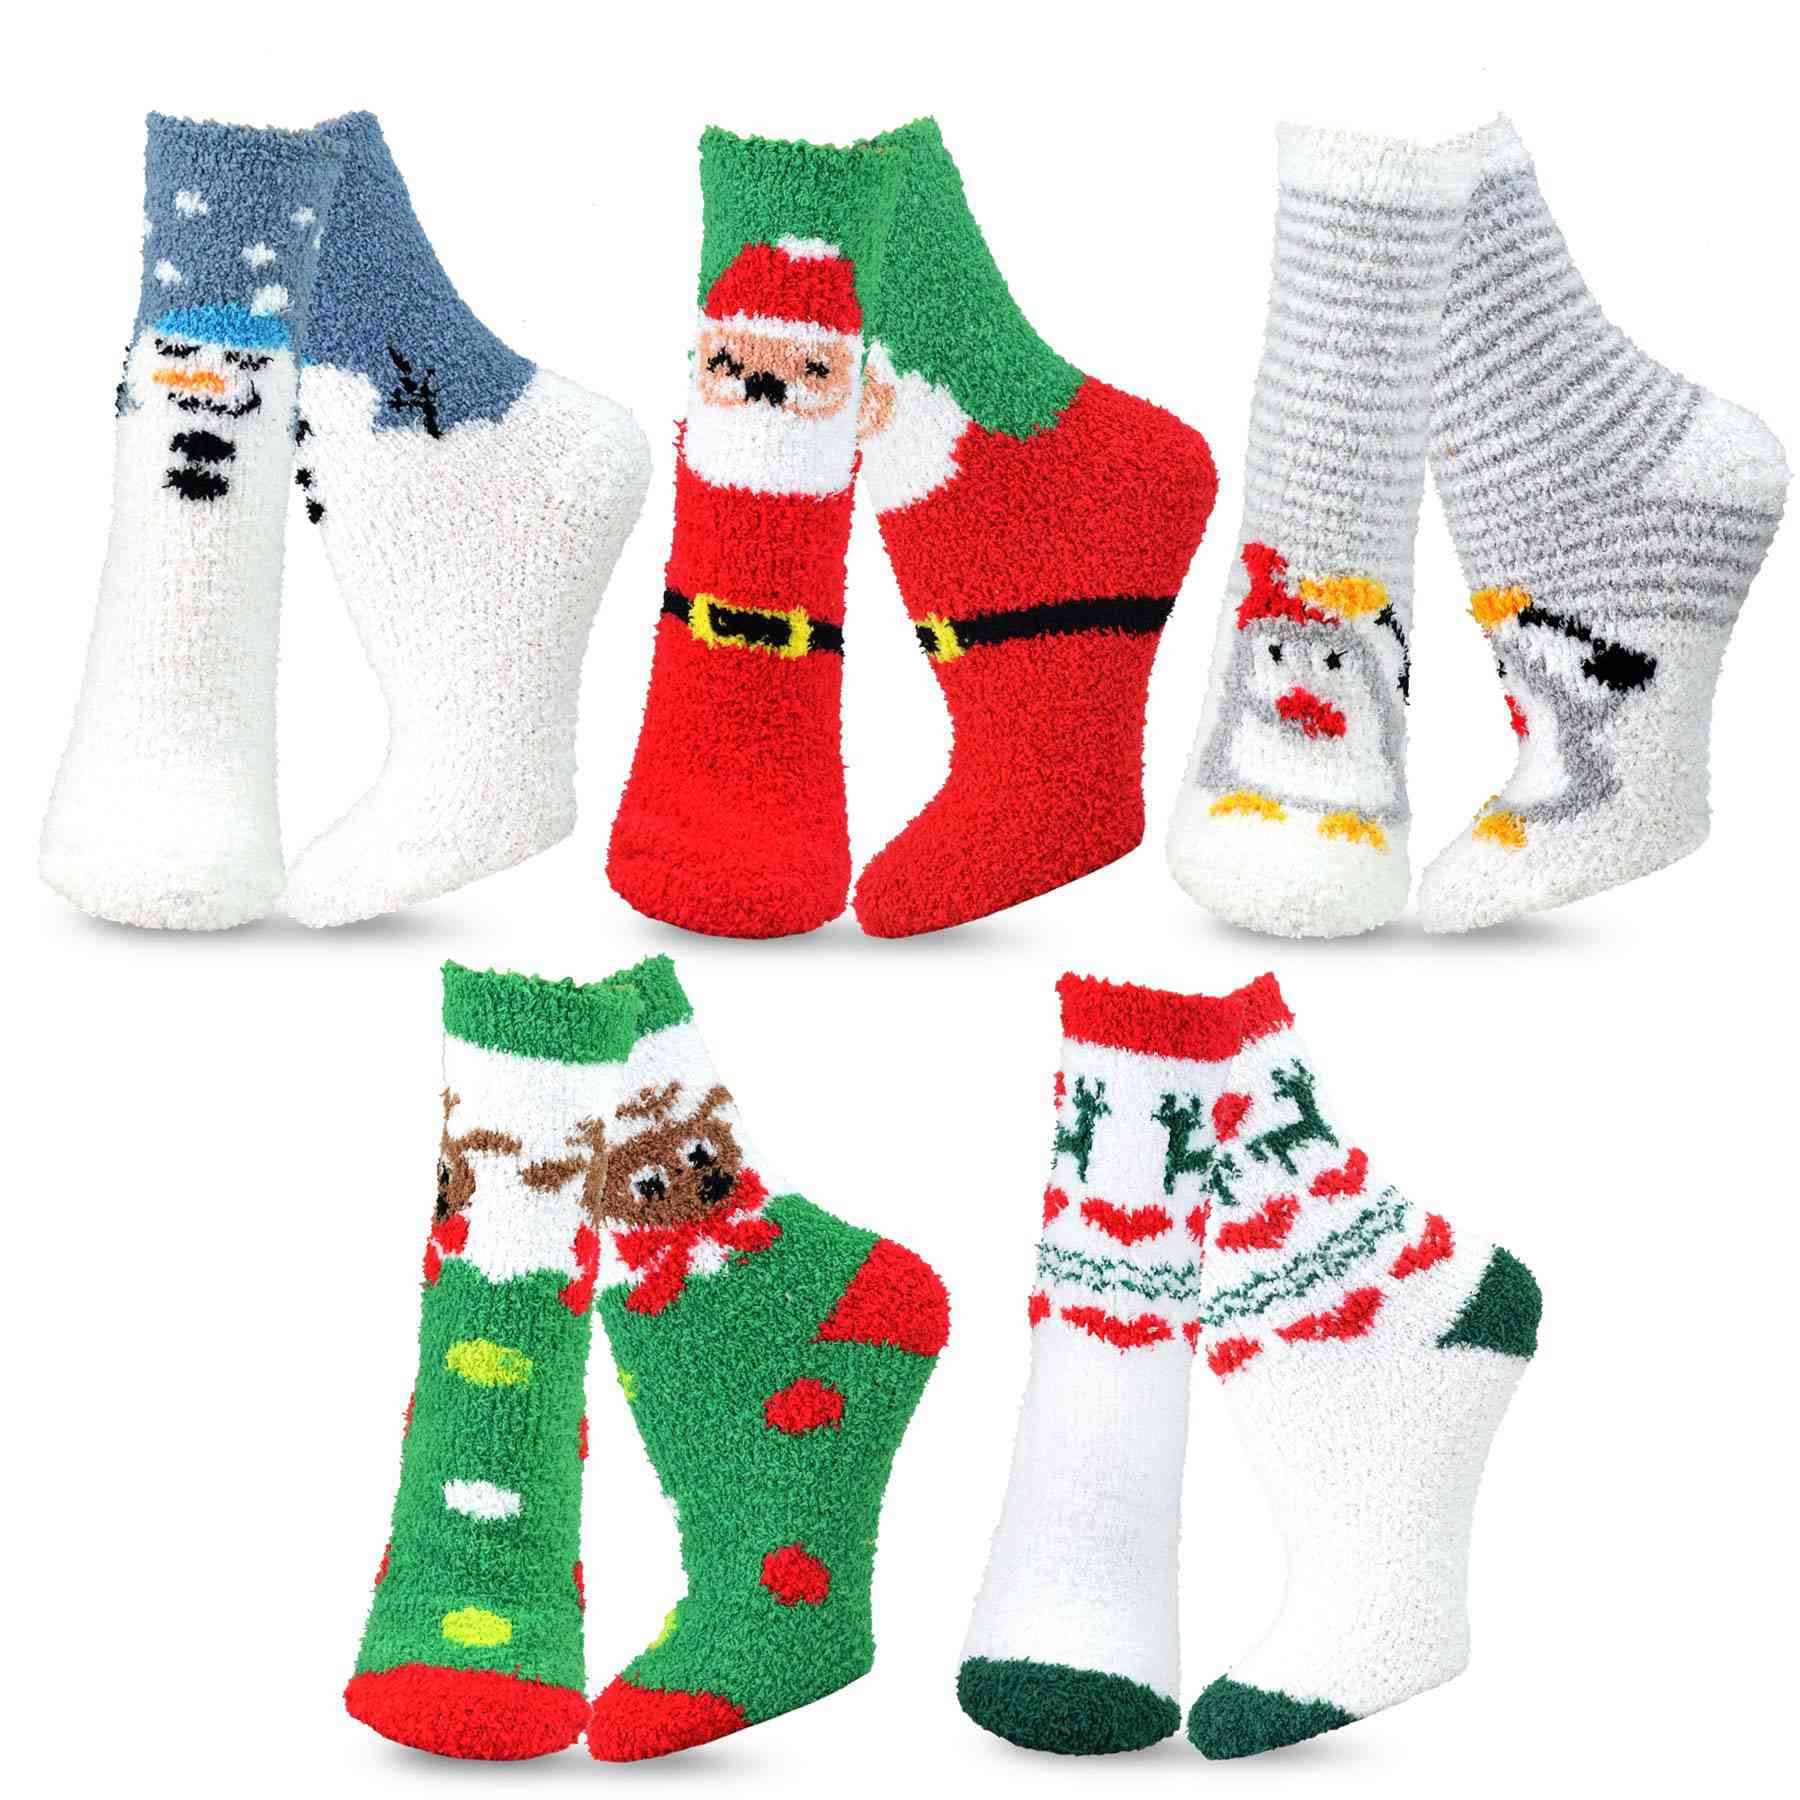 Sublimation Socks can Warm Up Our Christmas - Knowleages - SolToPrint ...